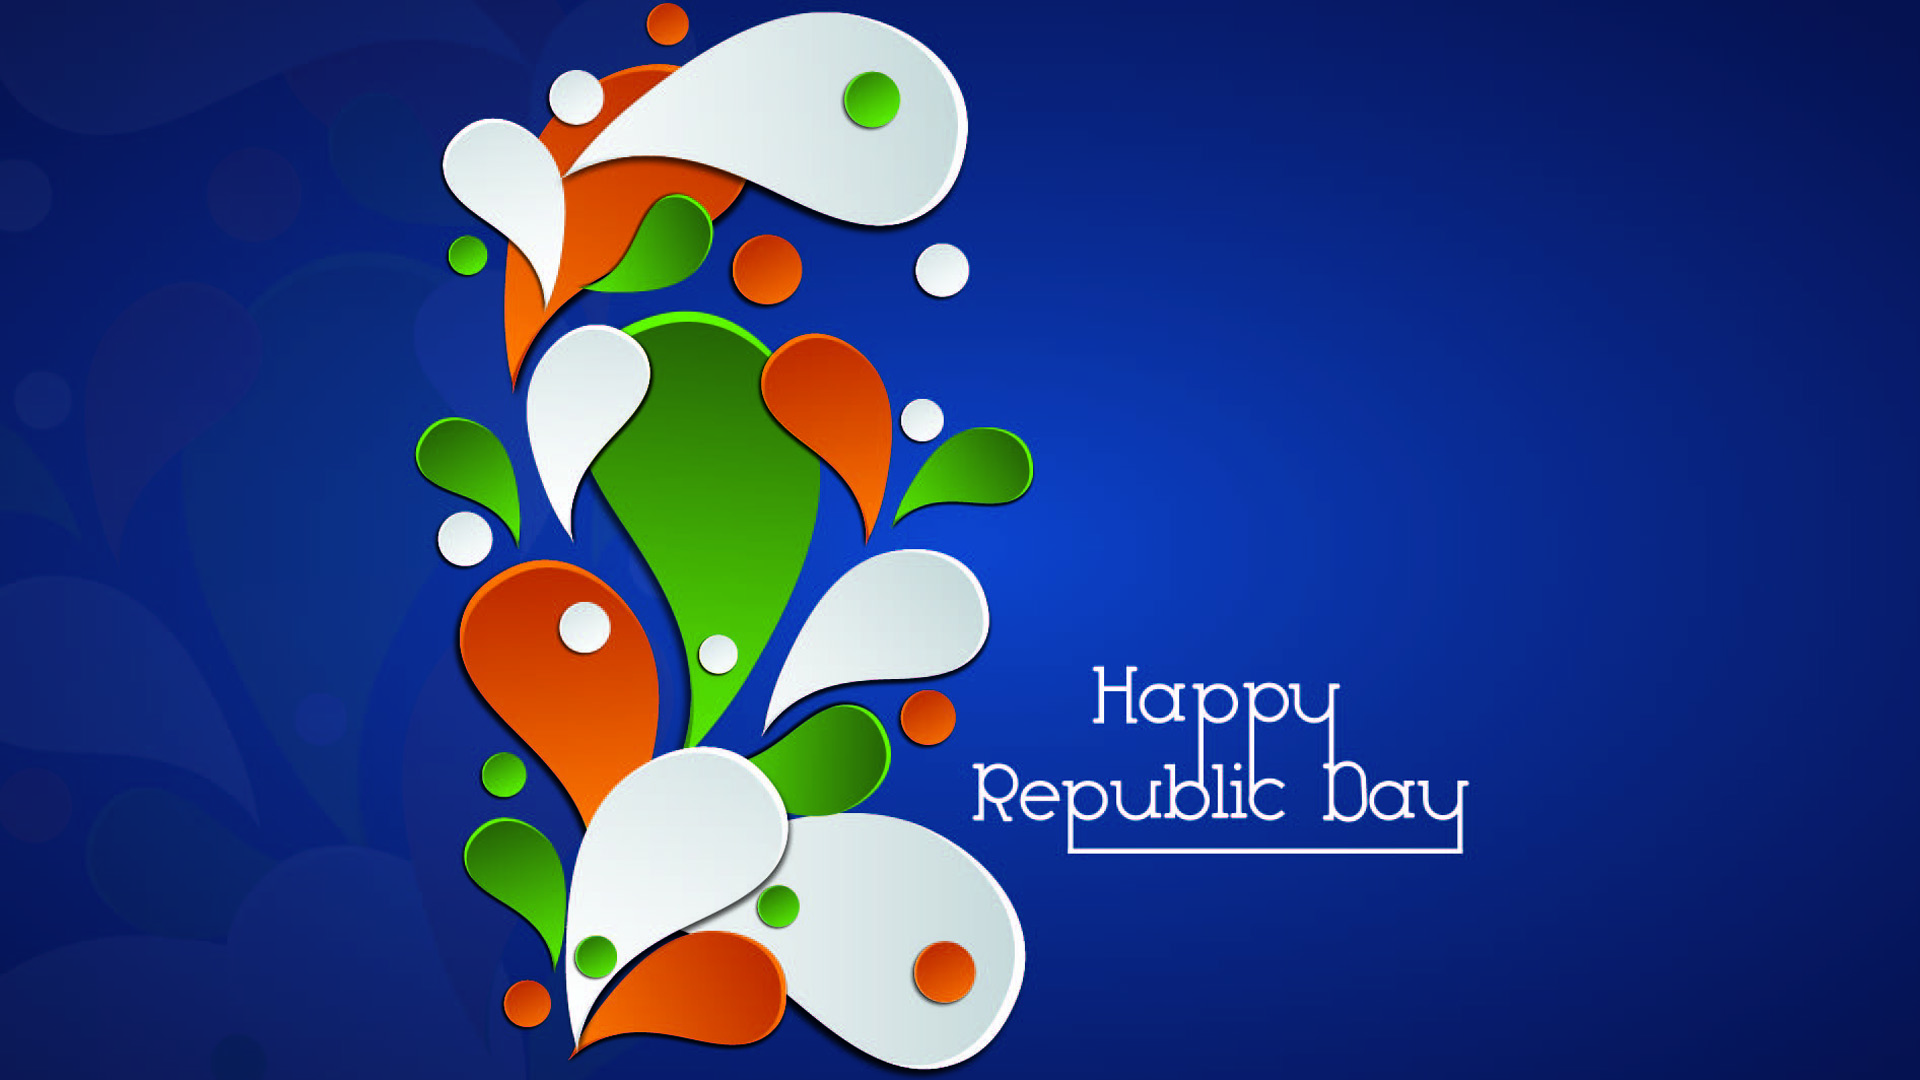 26 Jan India Republic Day Images for Whatsapp DP, Profile Wallpapers Download